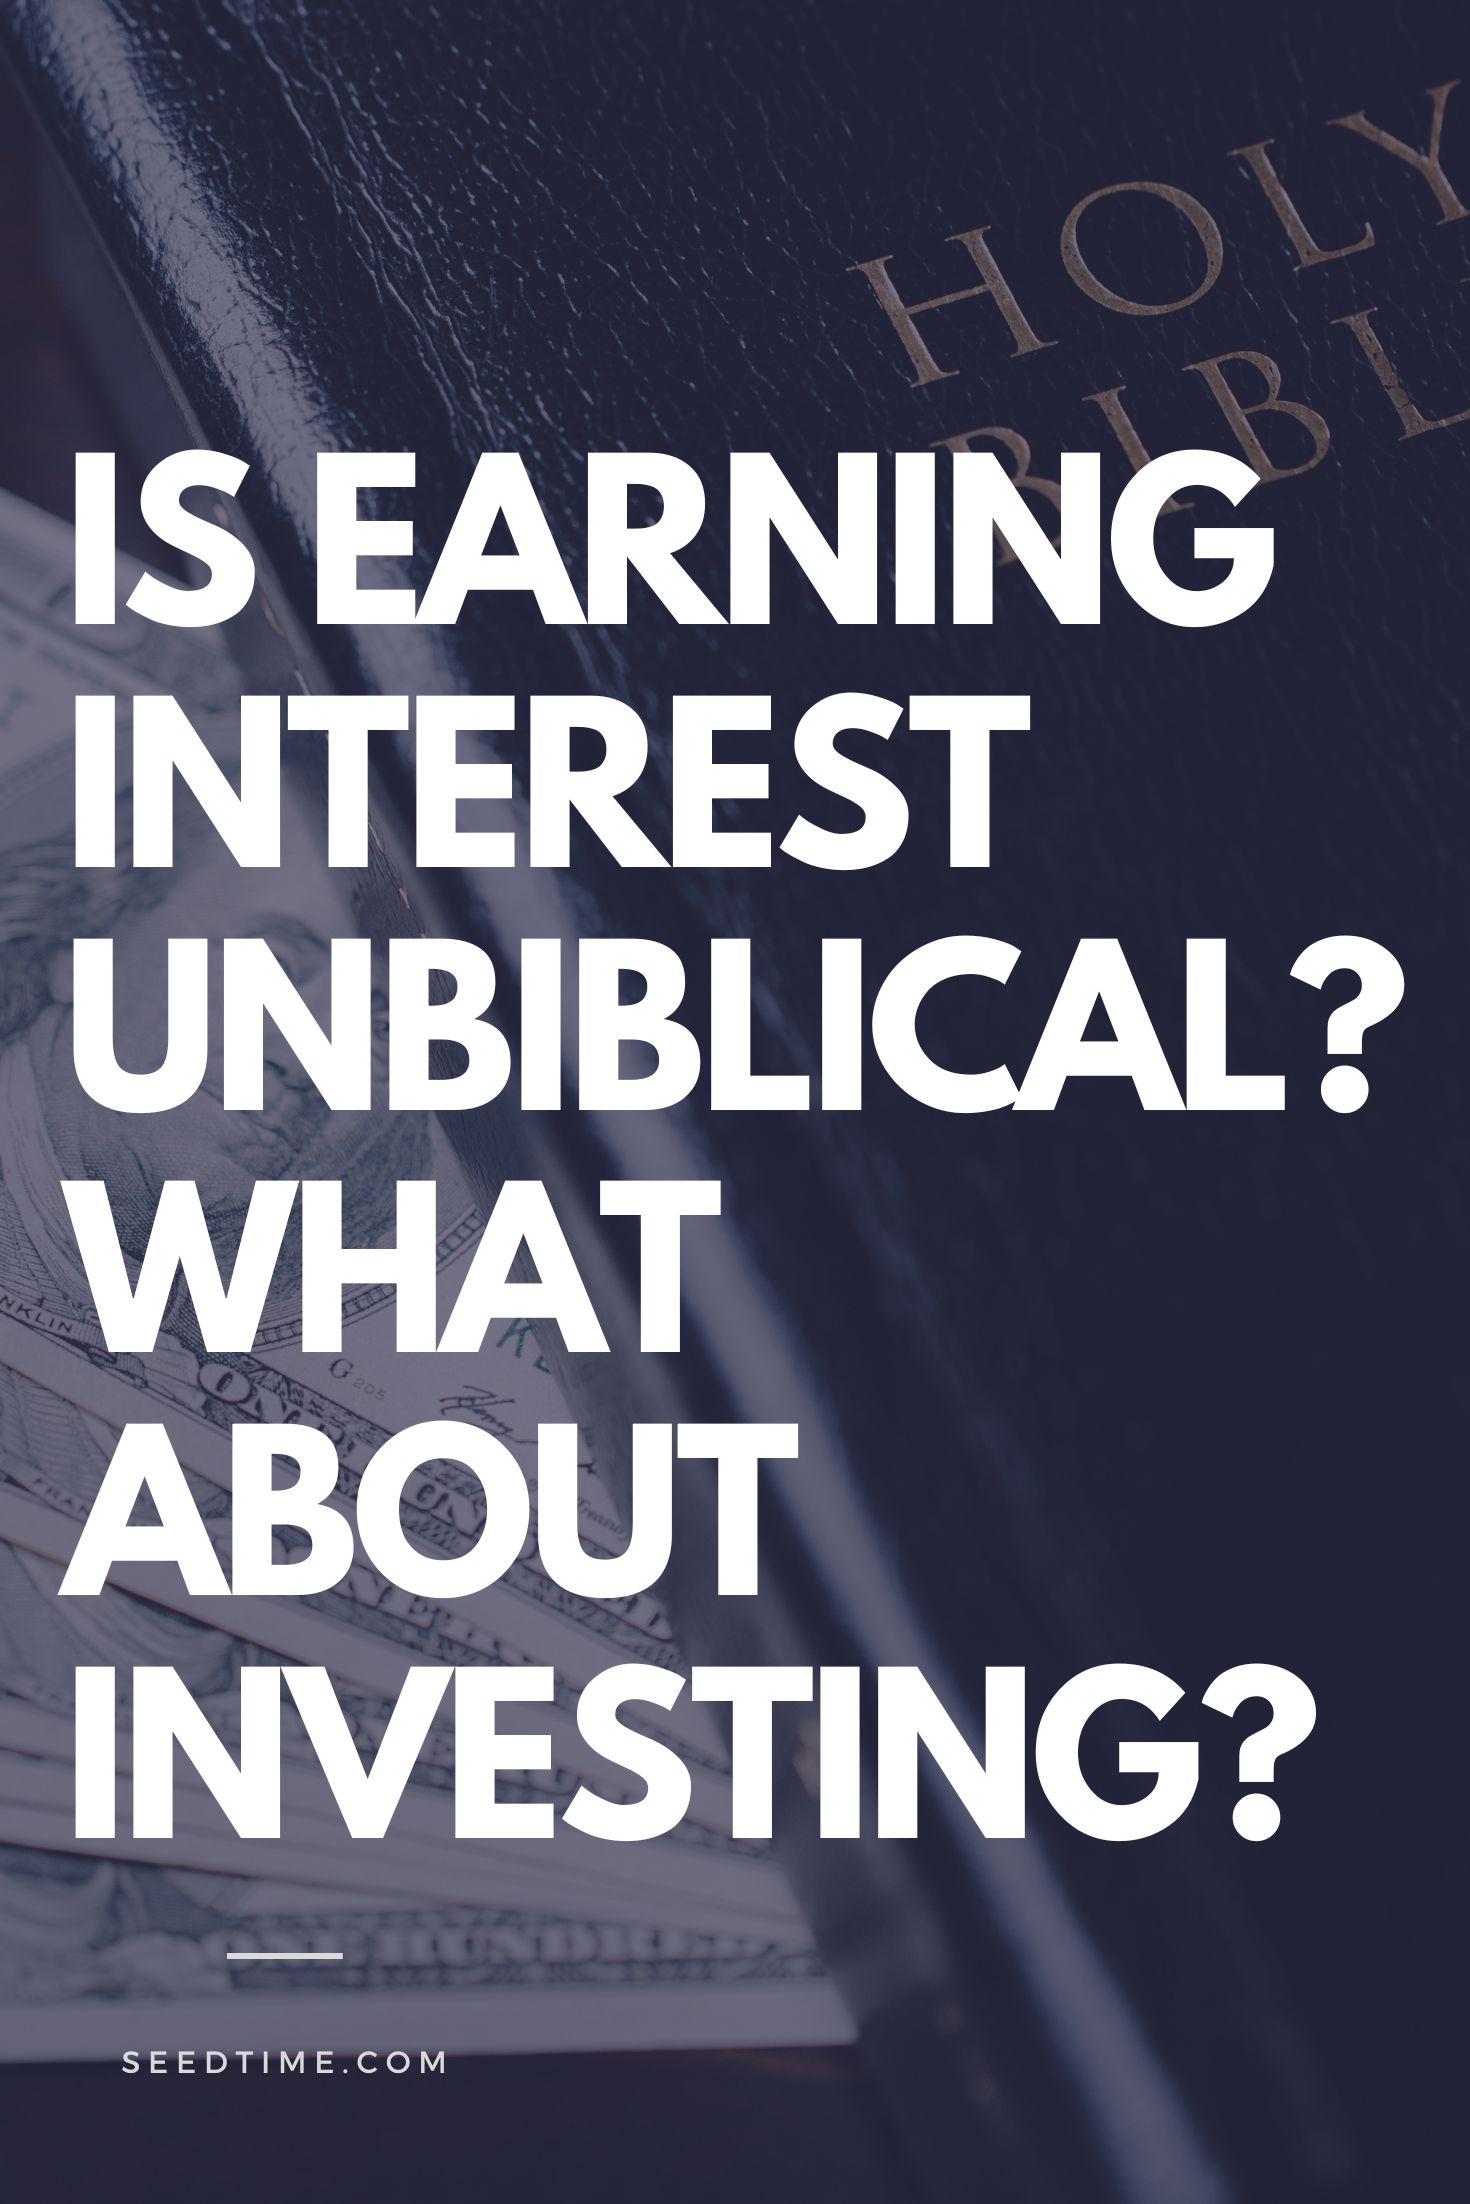 Is earning interest unbiblical? Is investing unbiblical?